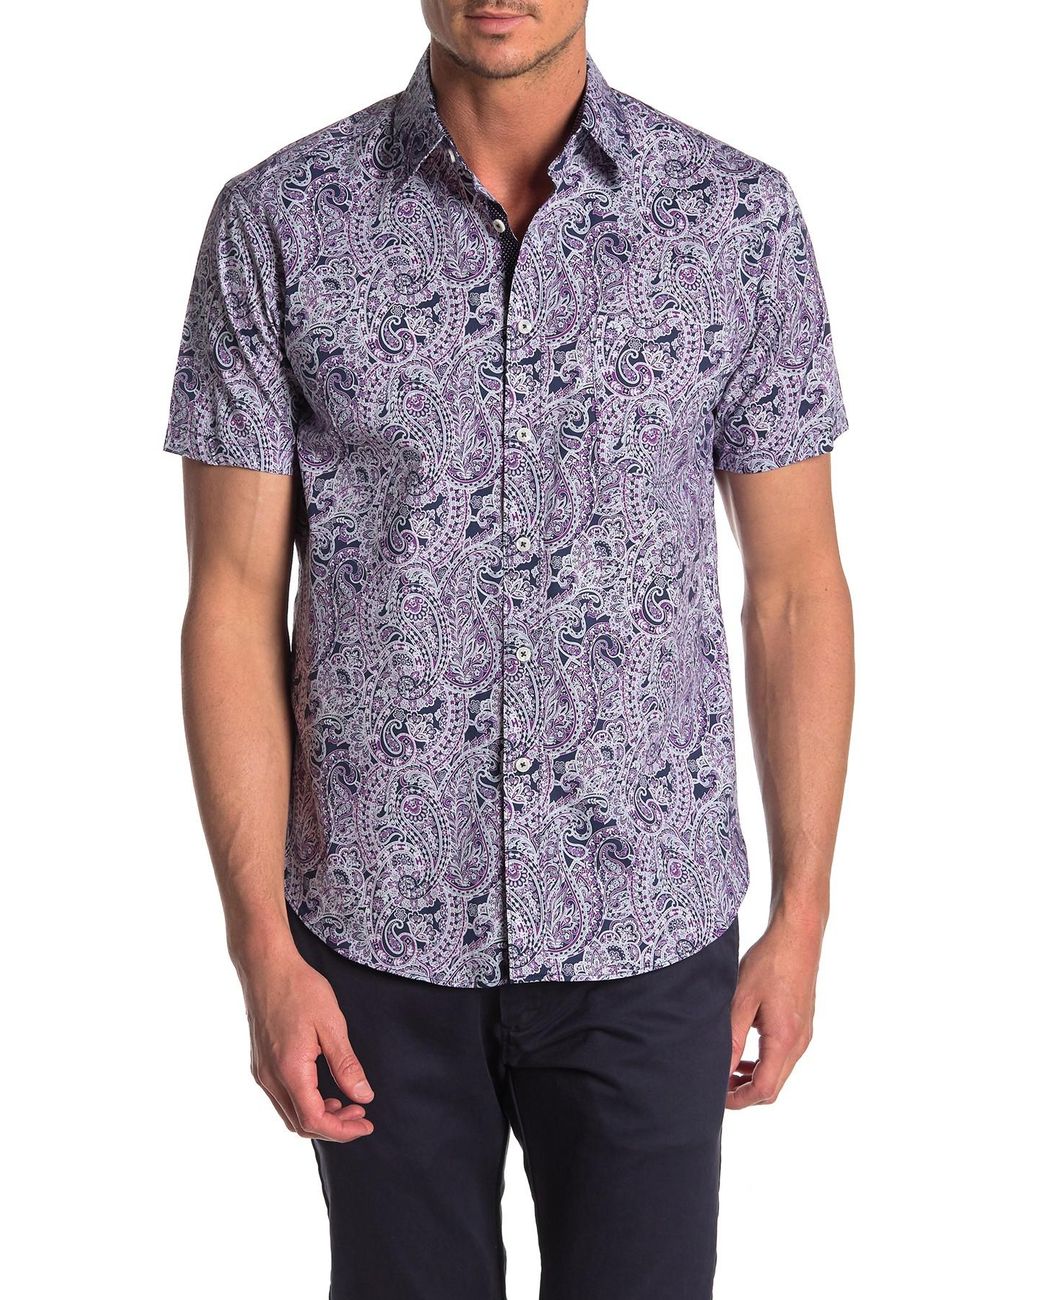 Con.struct Paisley Short Sleeve Slim Fit Shirt for Men - Lyst